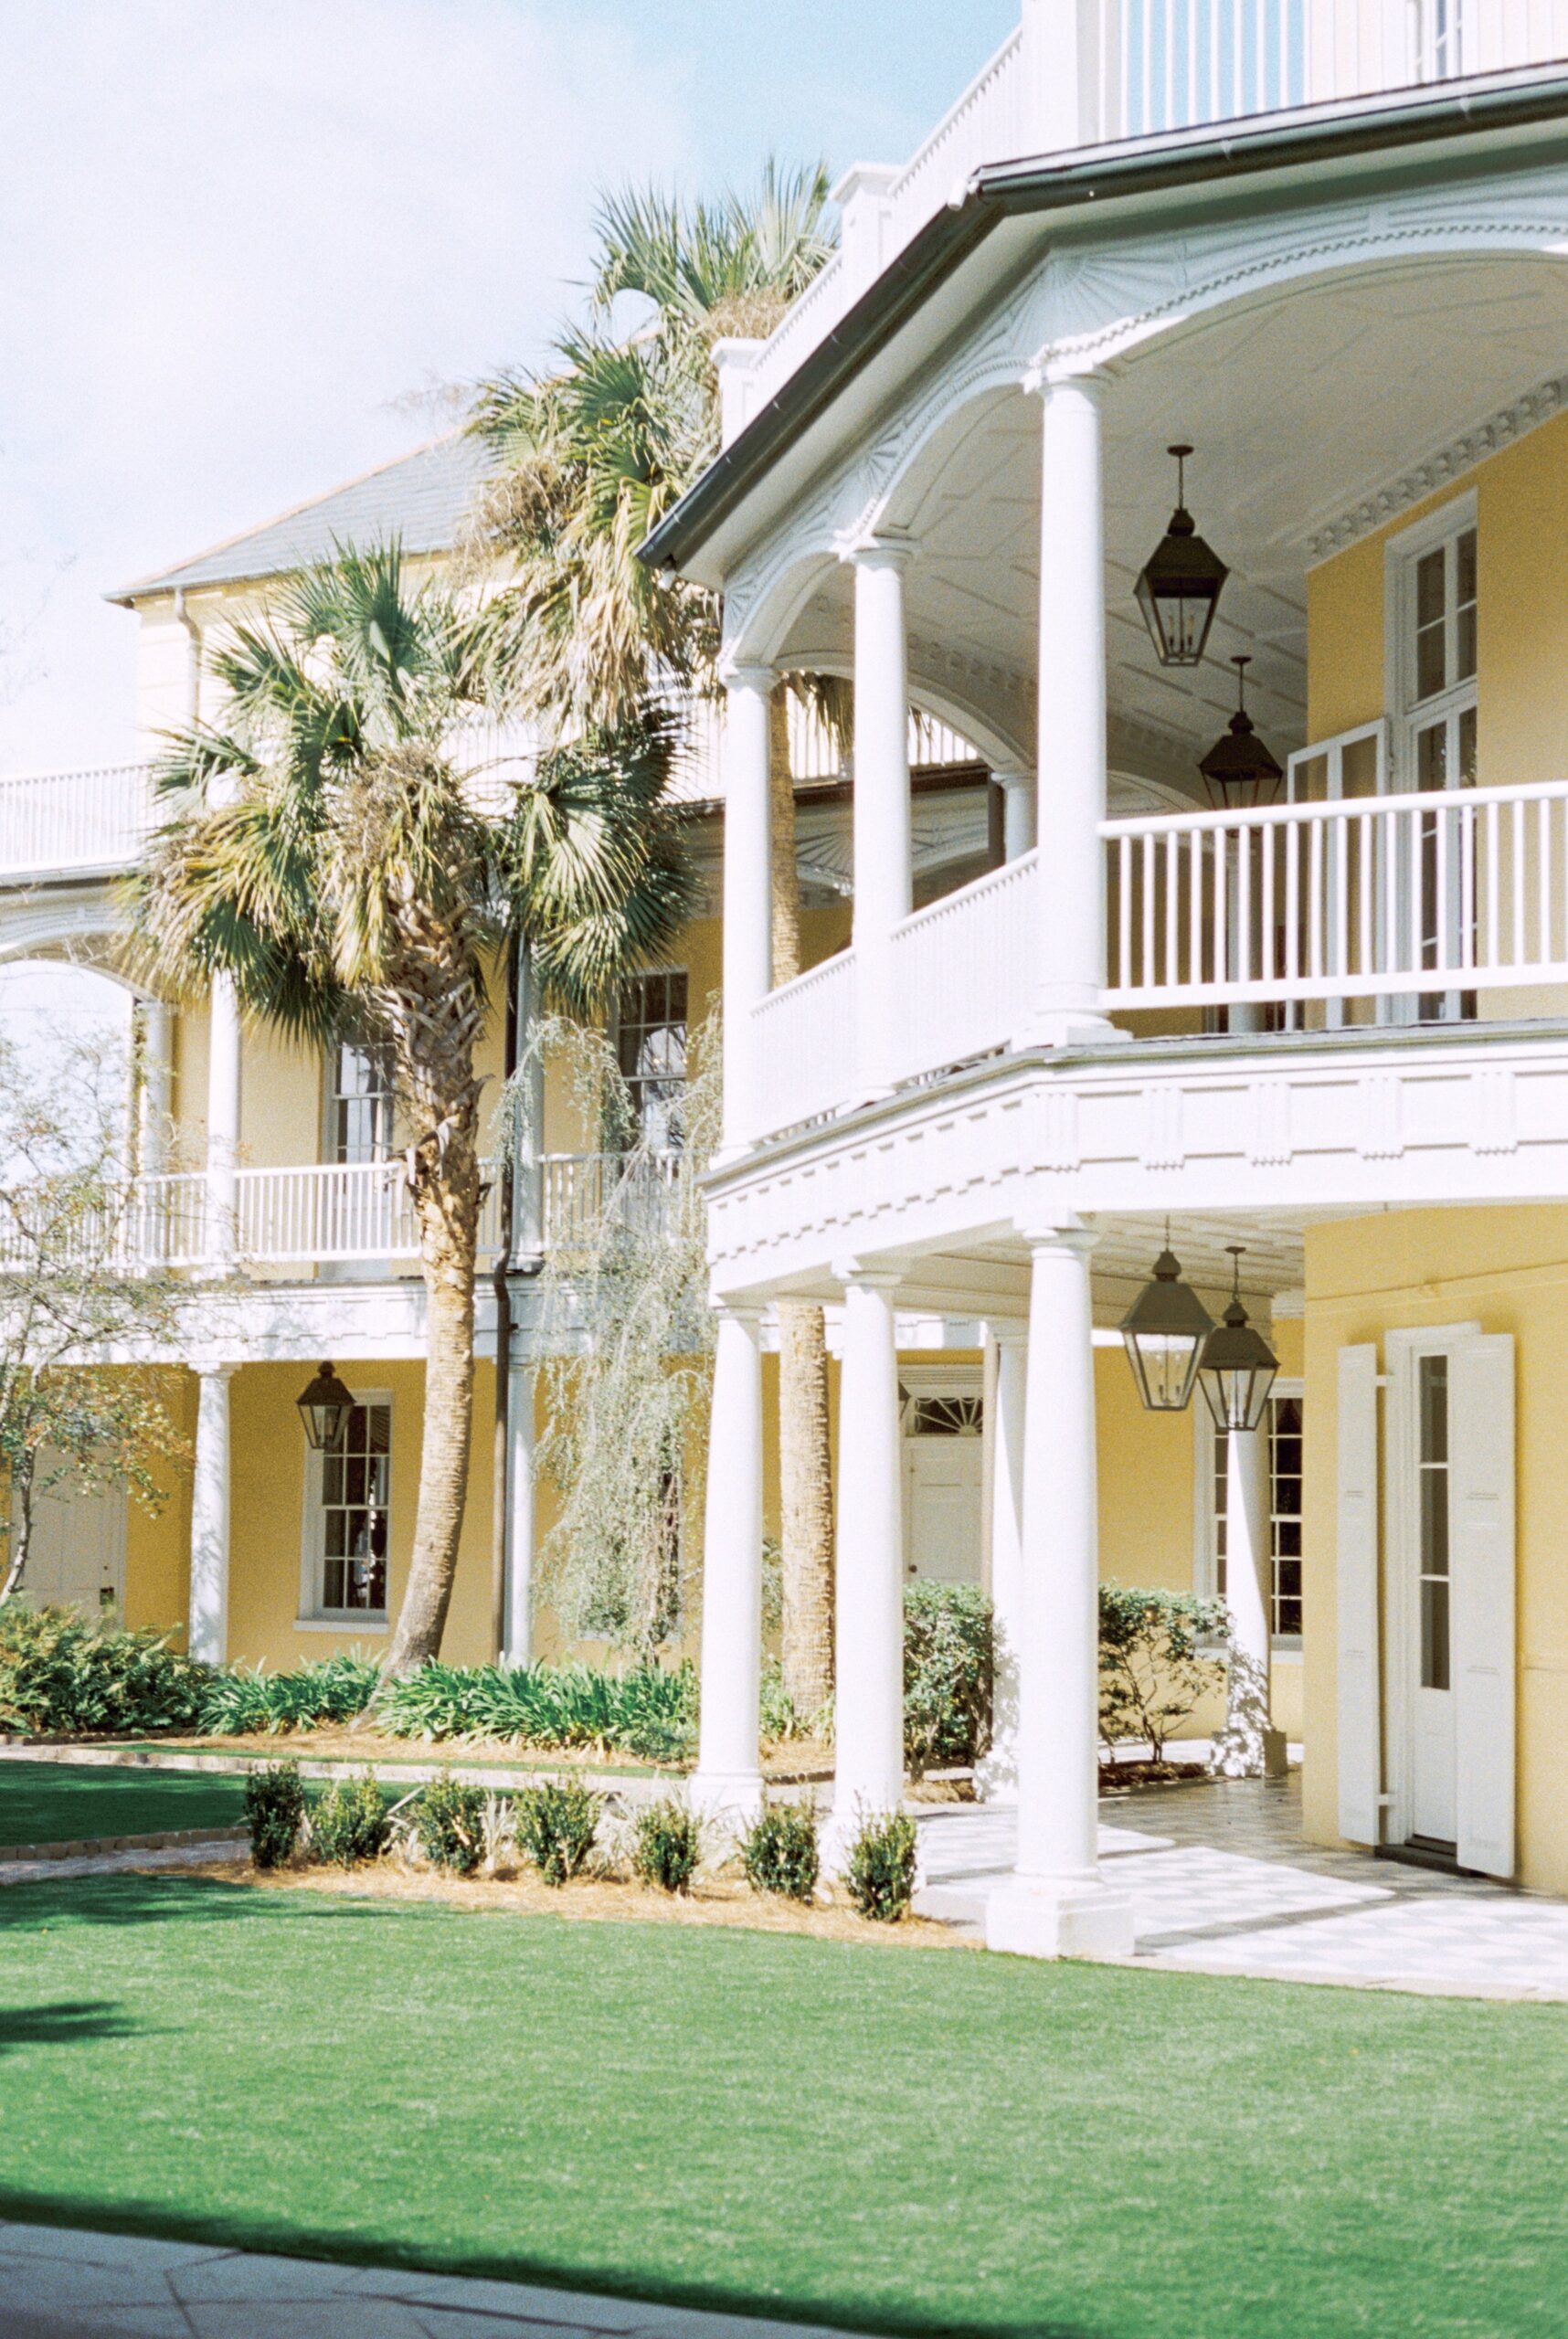 william aiken house porches and palm trees on 35mm film